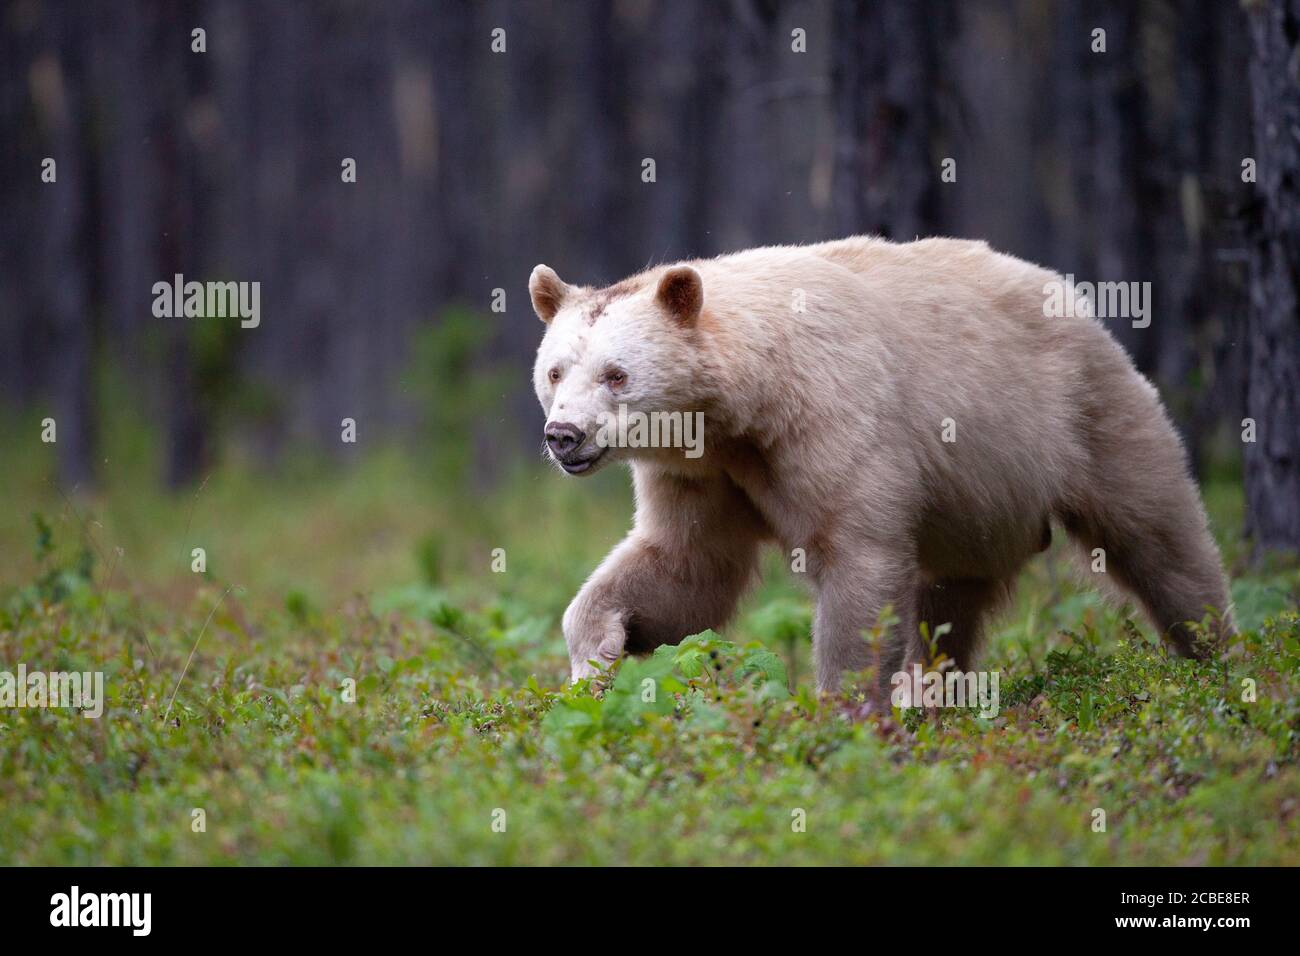 A kermode bear, also known as a spirit bear, emerging from a forest near Terrace, BC, Canada. Stock Photo